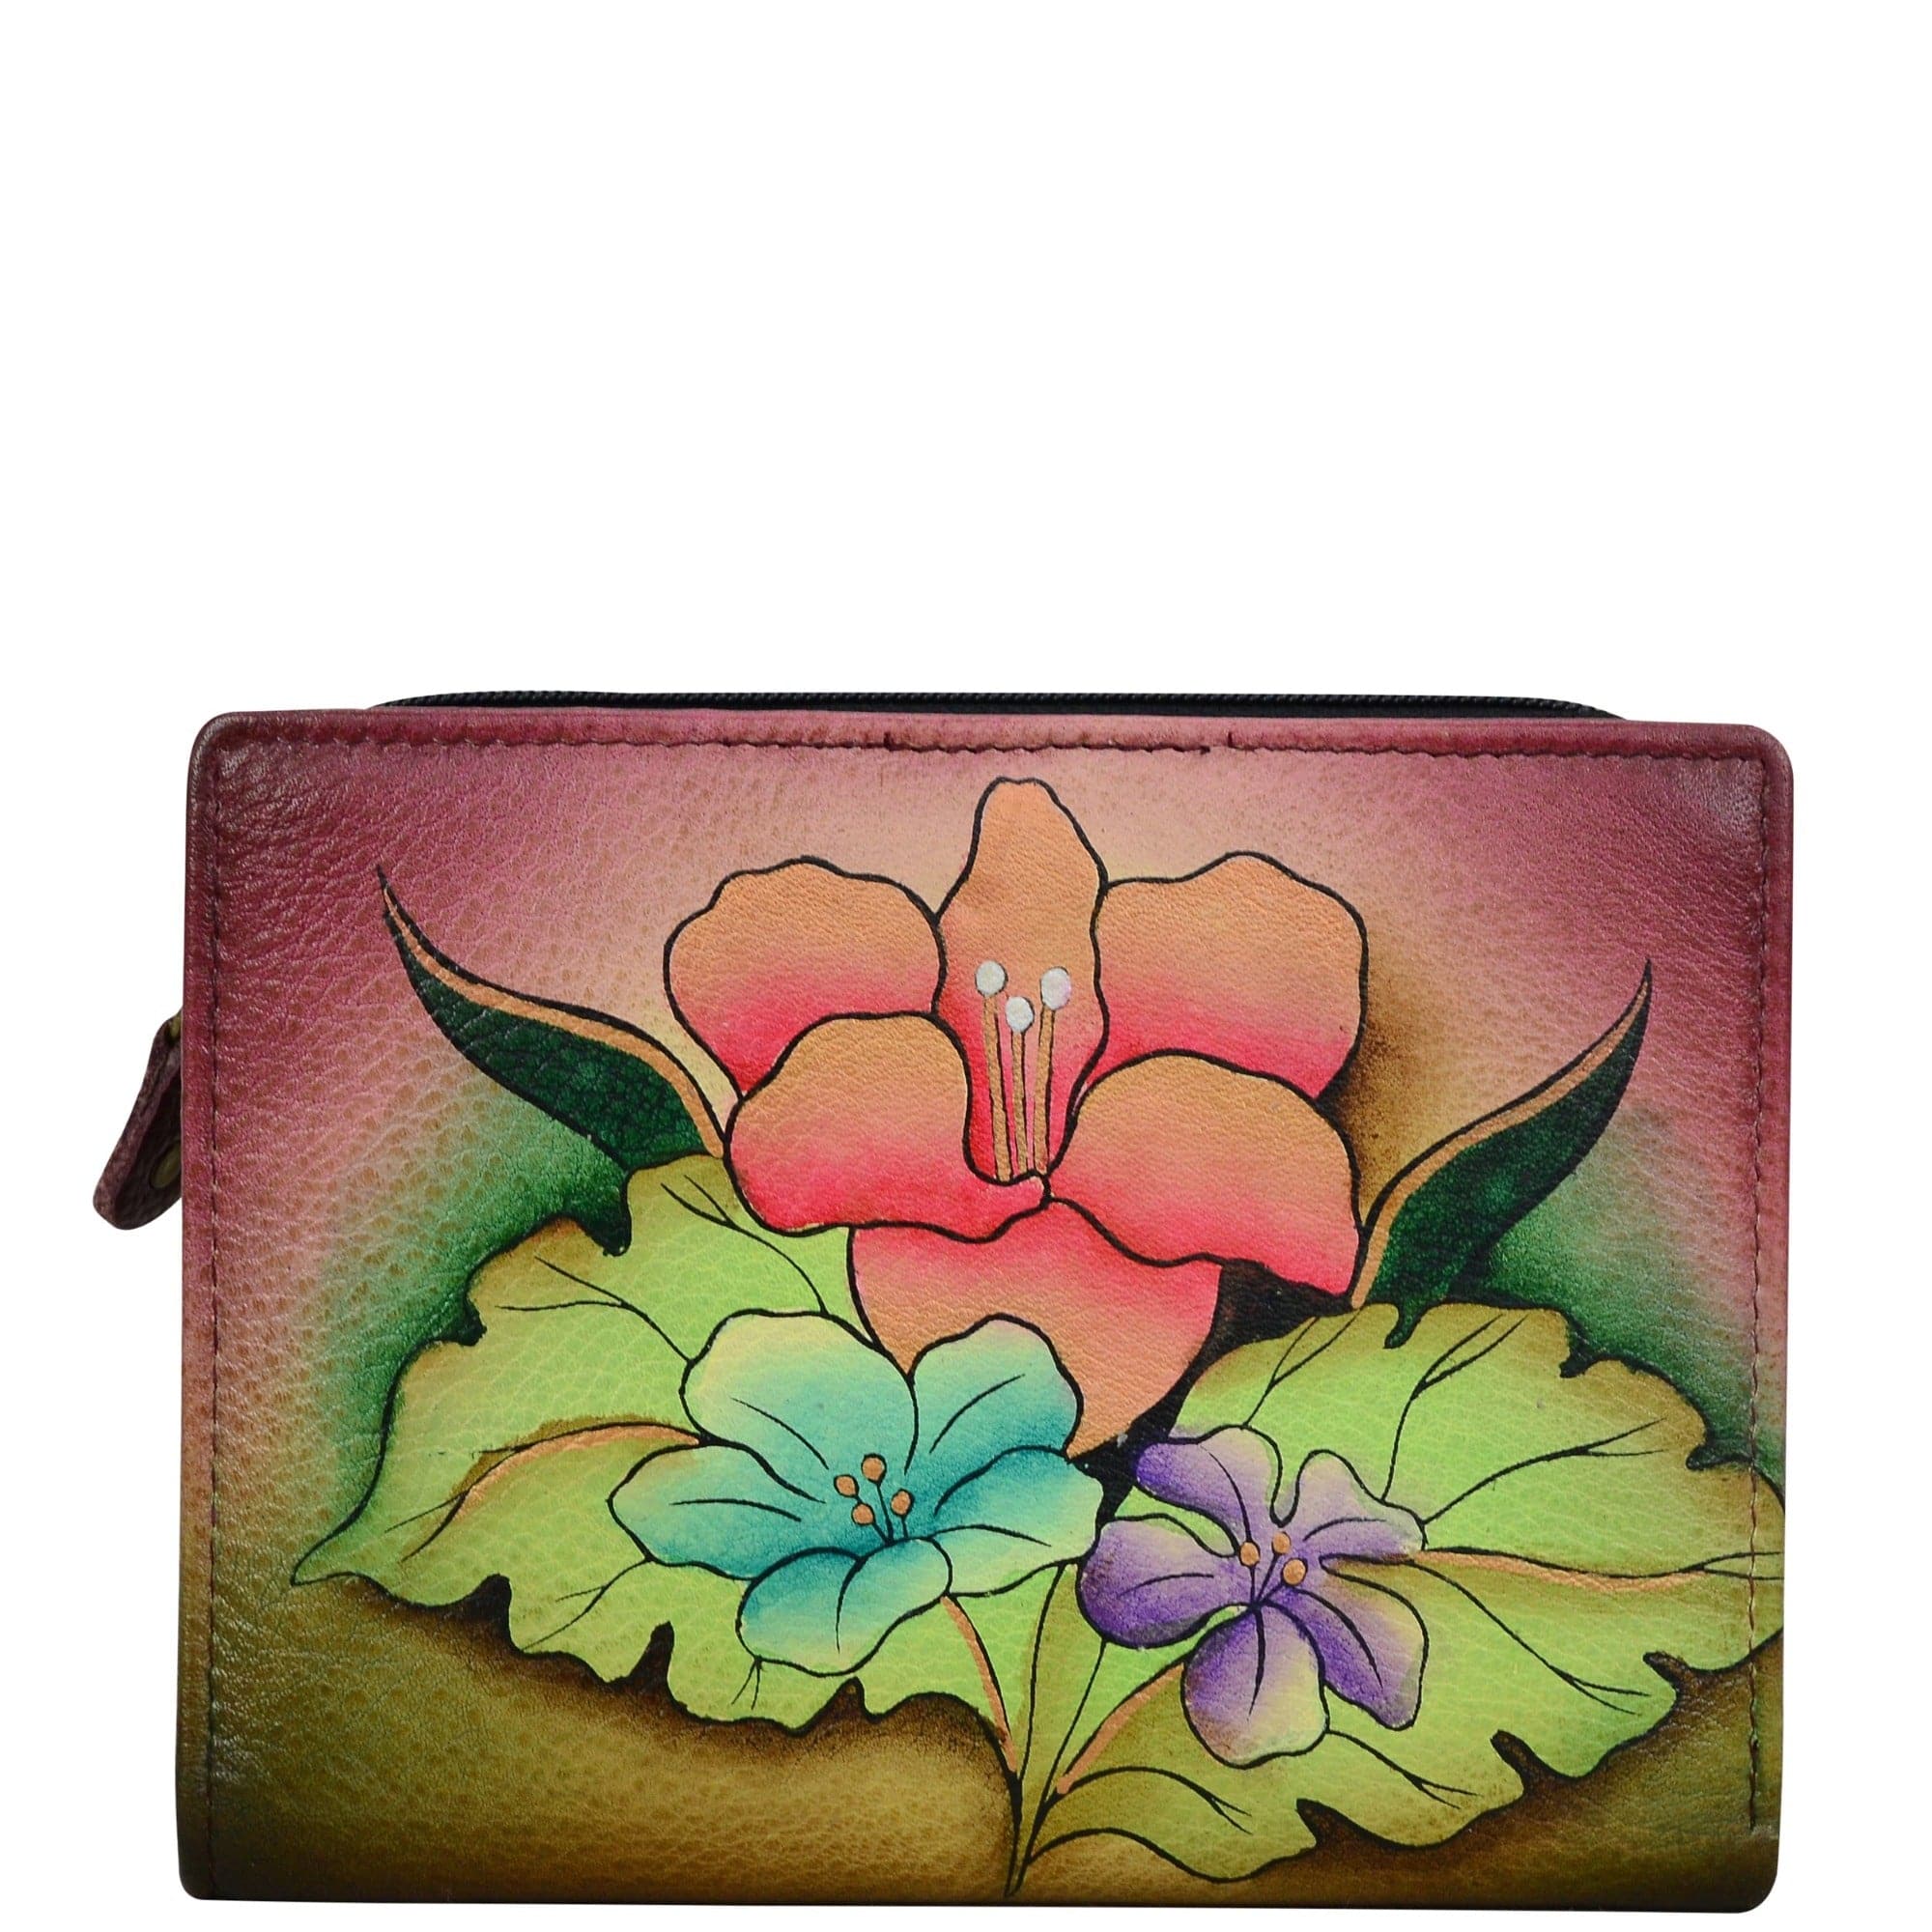 Anuschka Hand-Painted Leather 2-fold Organizer Wallet